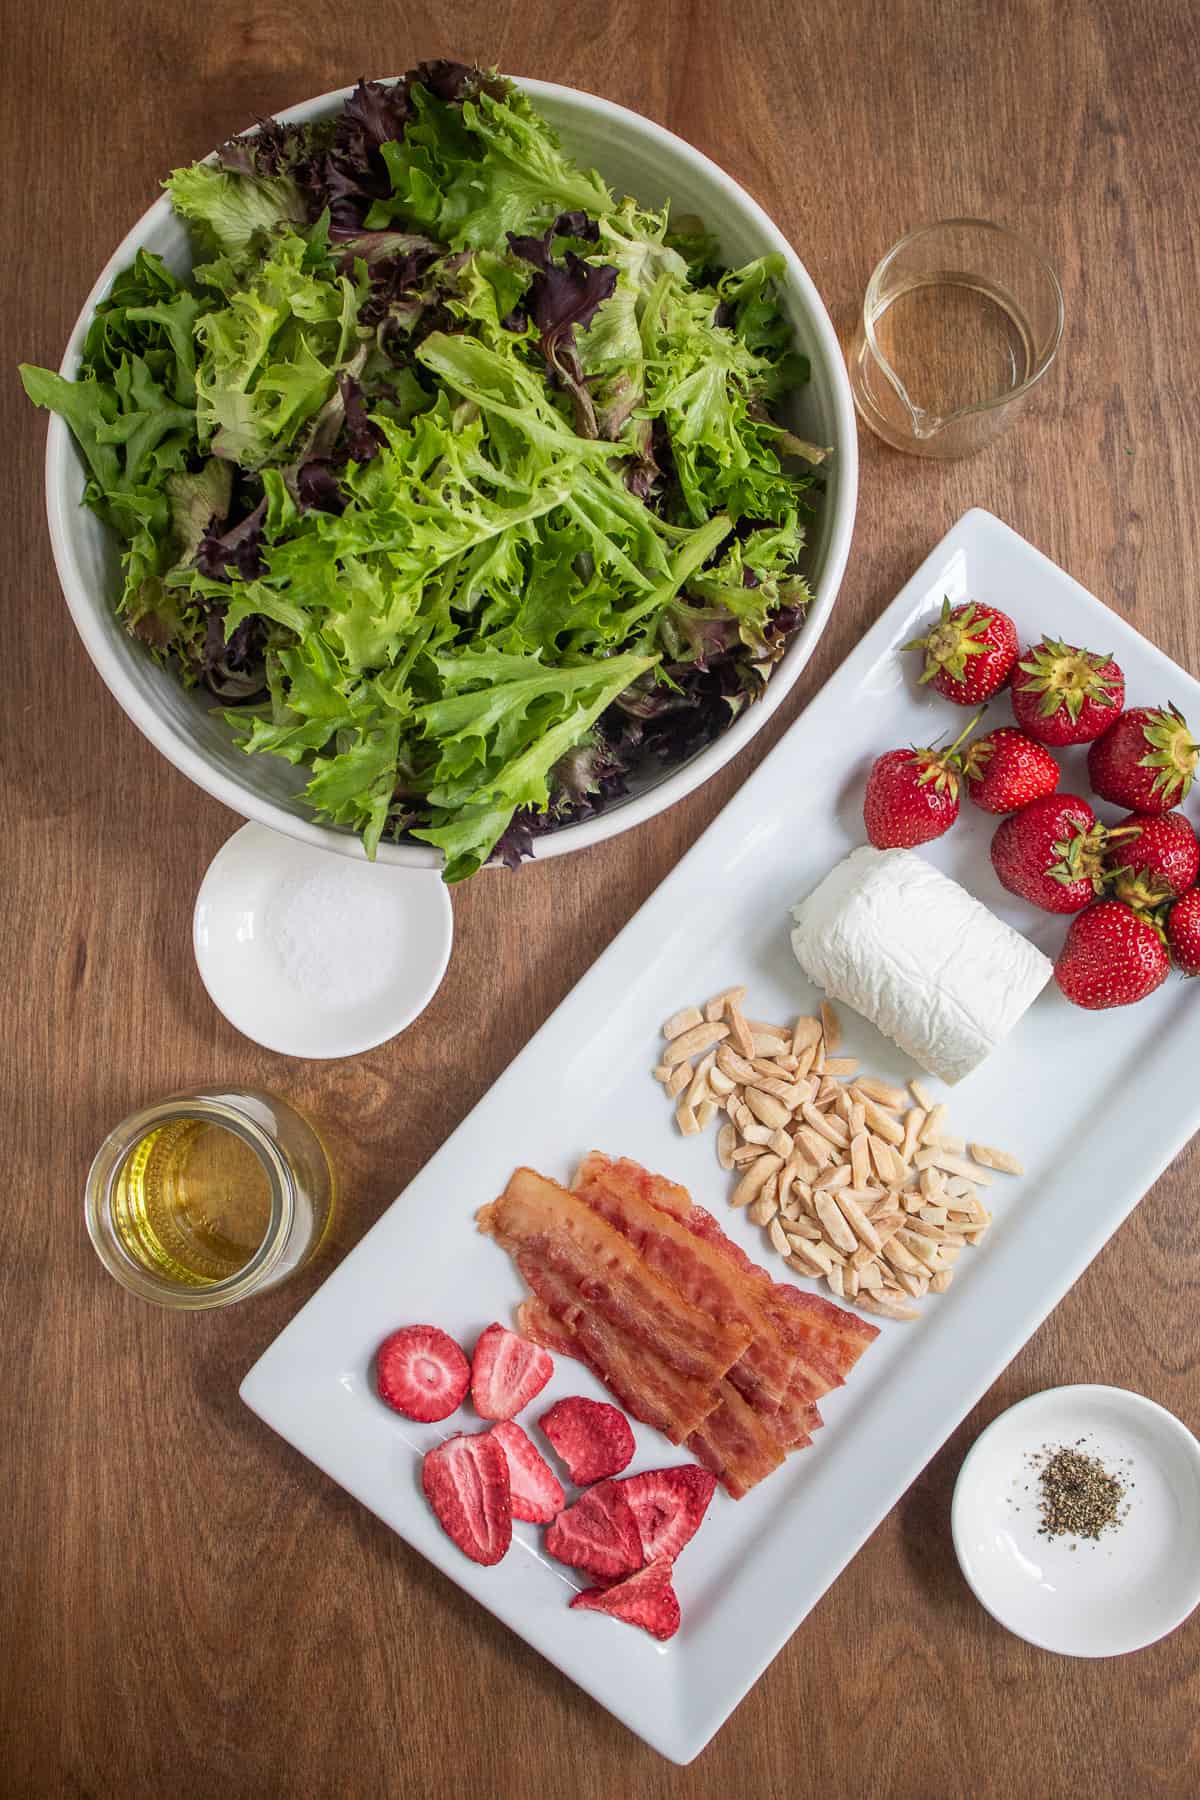 Ingredients for the salad are laid out on a brown wooden surface.